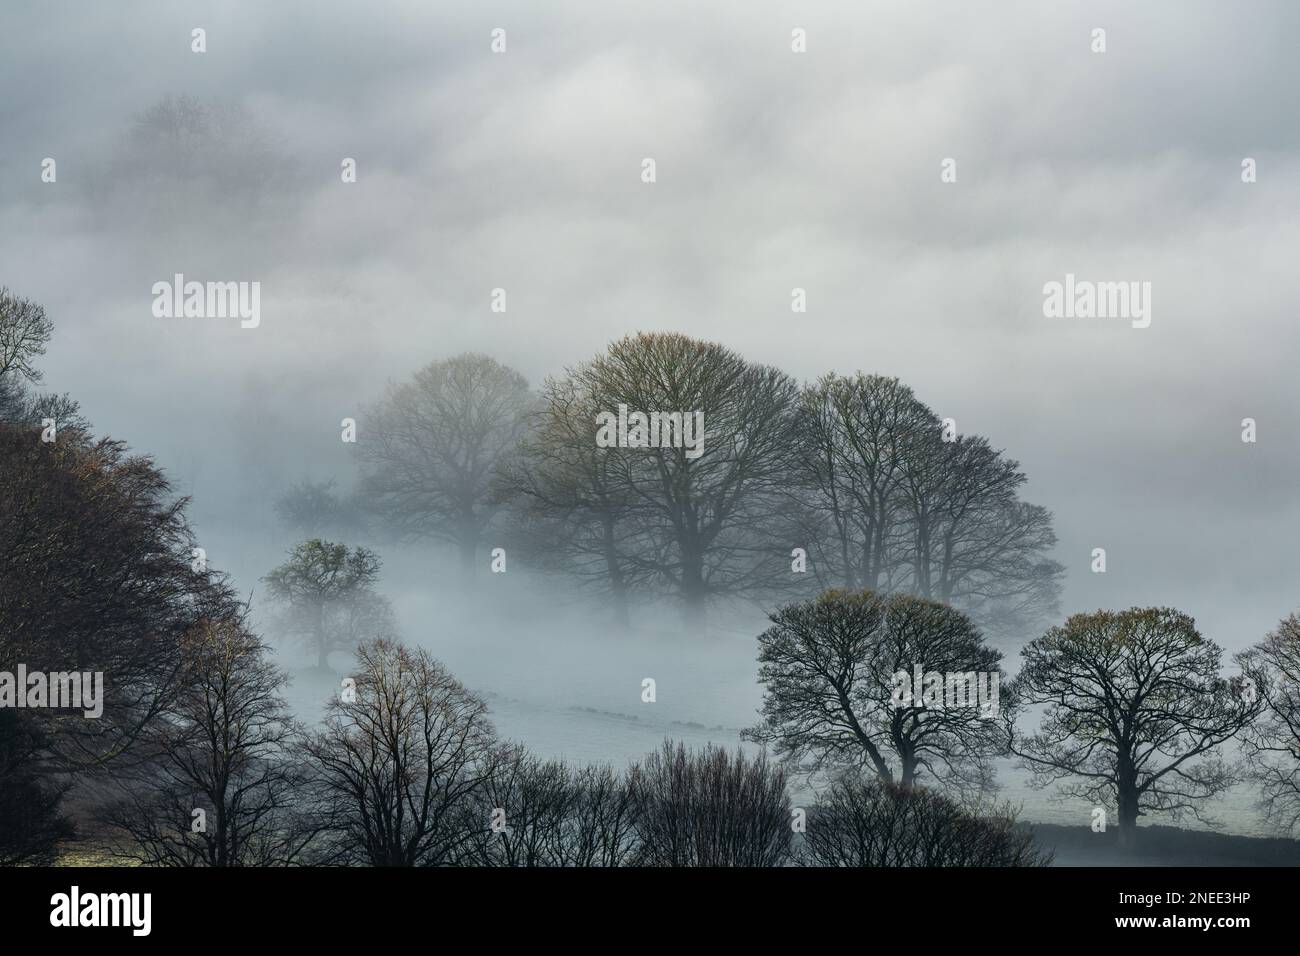 Trees, and mist. Bamford Edge landscape vignette during a winter sunrise temperature inversion in the Peak District National Park, England, UK. Stock Photo